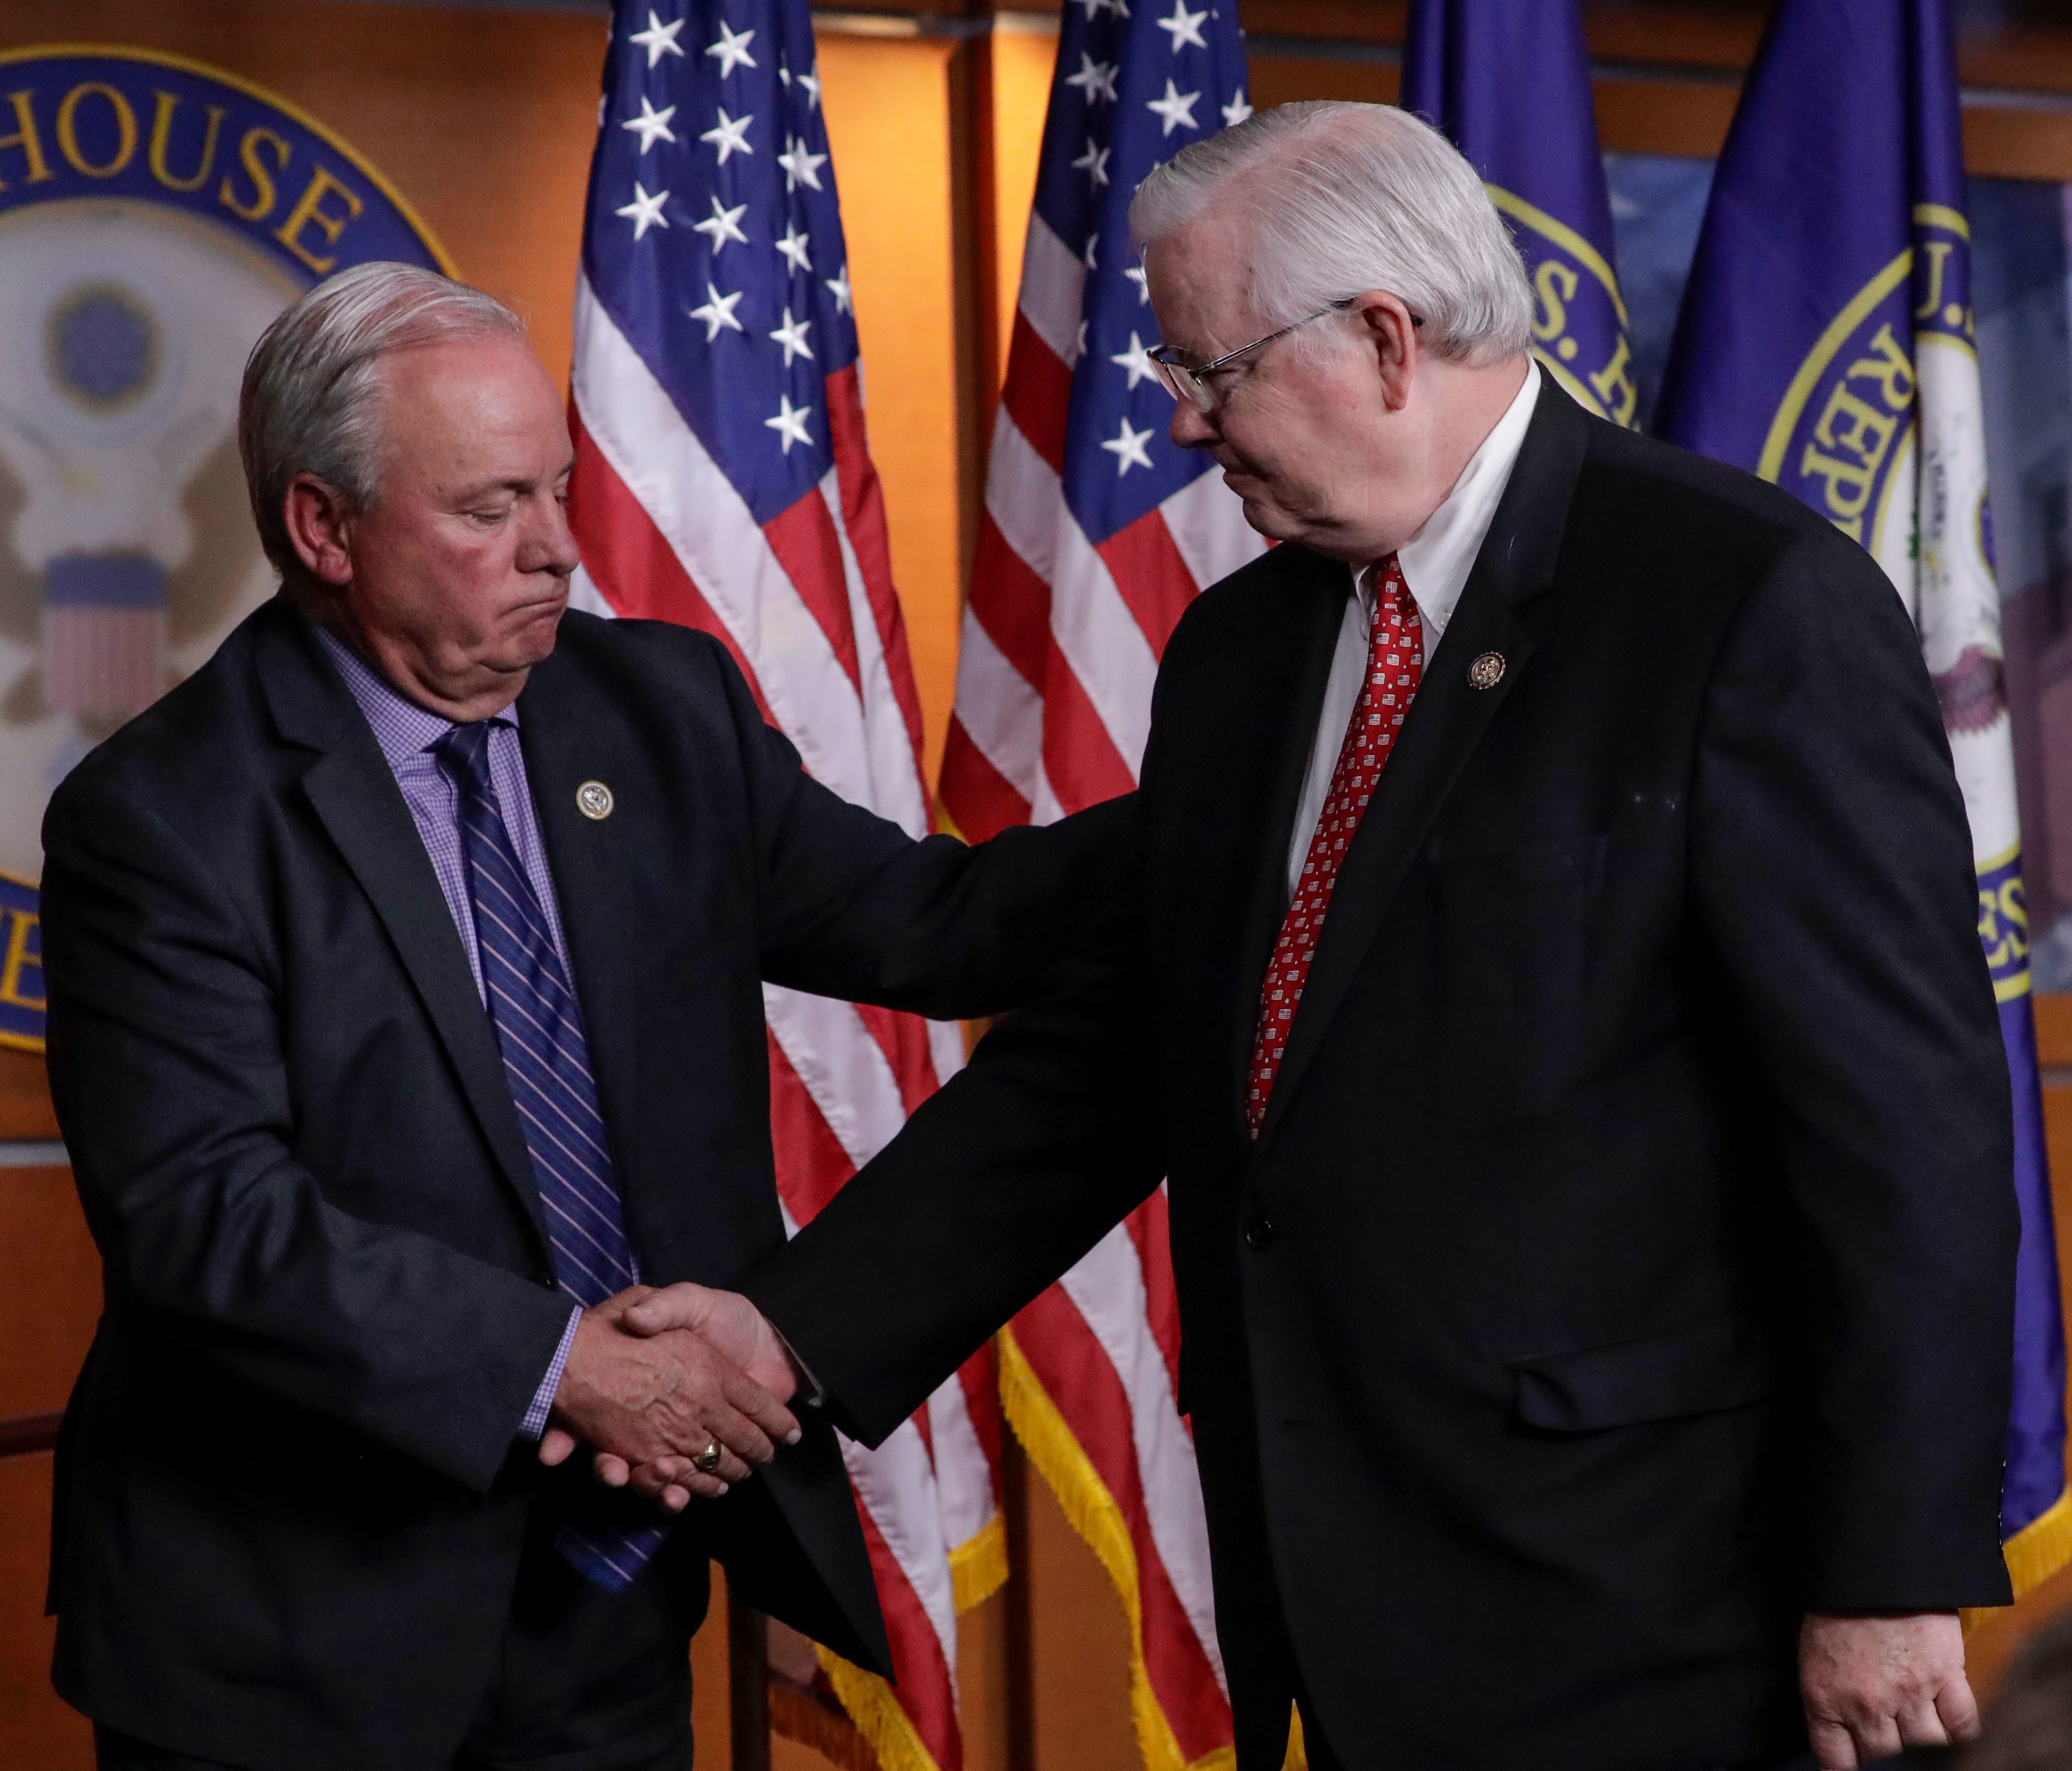 Rep. Mike Doyle, D-Pa., (left) and Rep. Joe Barton, R-Texas, (right) managers of the congressional baseball teams, shake hands during a news conference on Capitol Hill. Both men talked about the shooting during a congressional baseball practice in Al